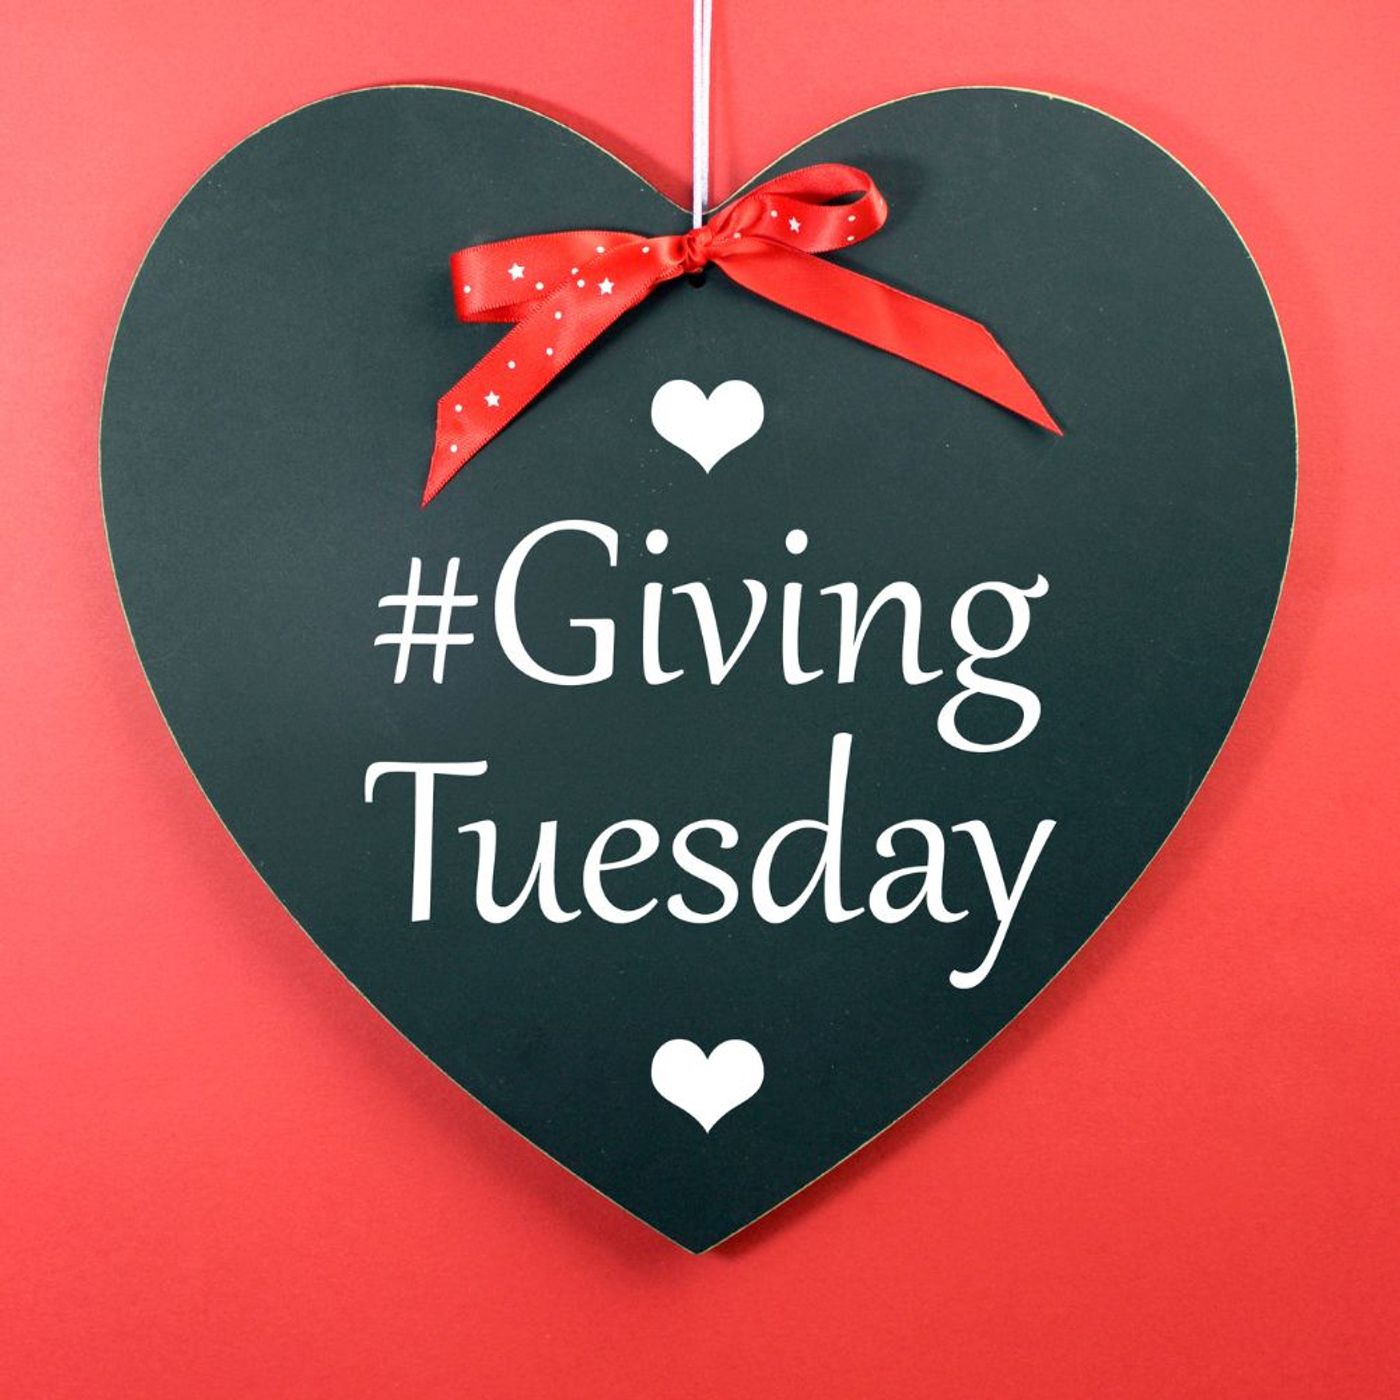 Today Is Giving Tuesday! Please Support These Organizations